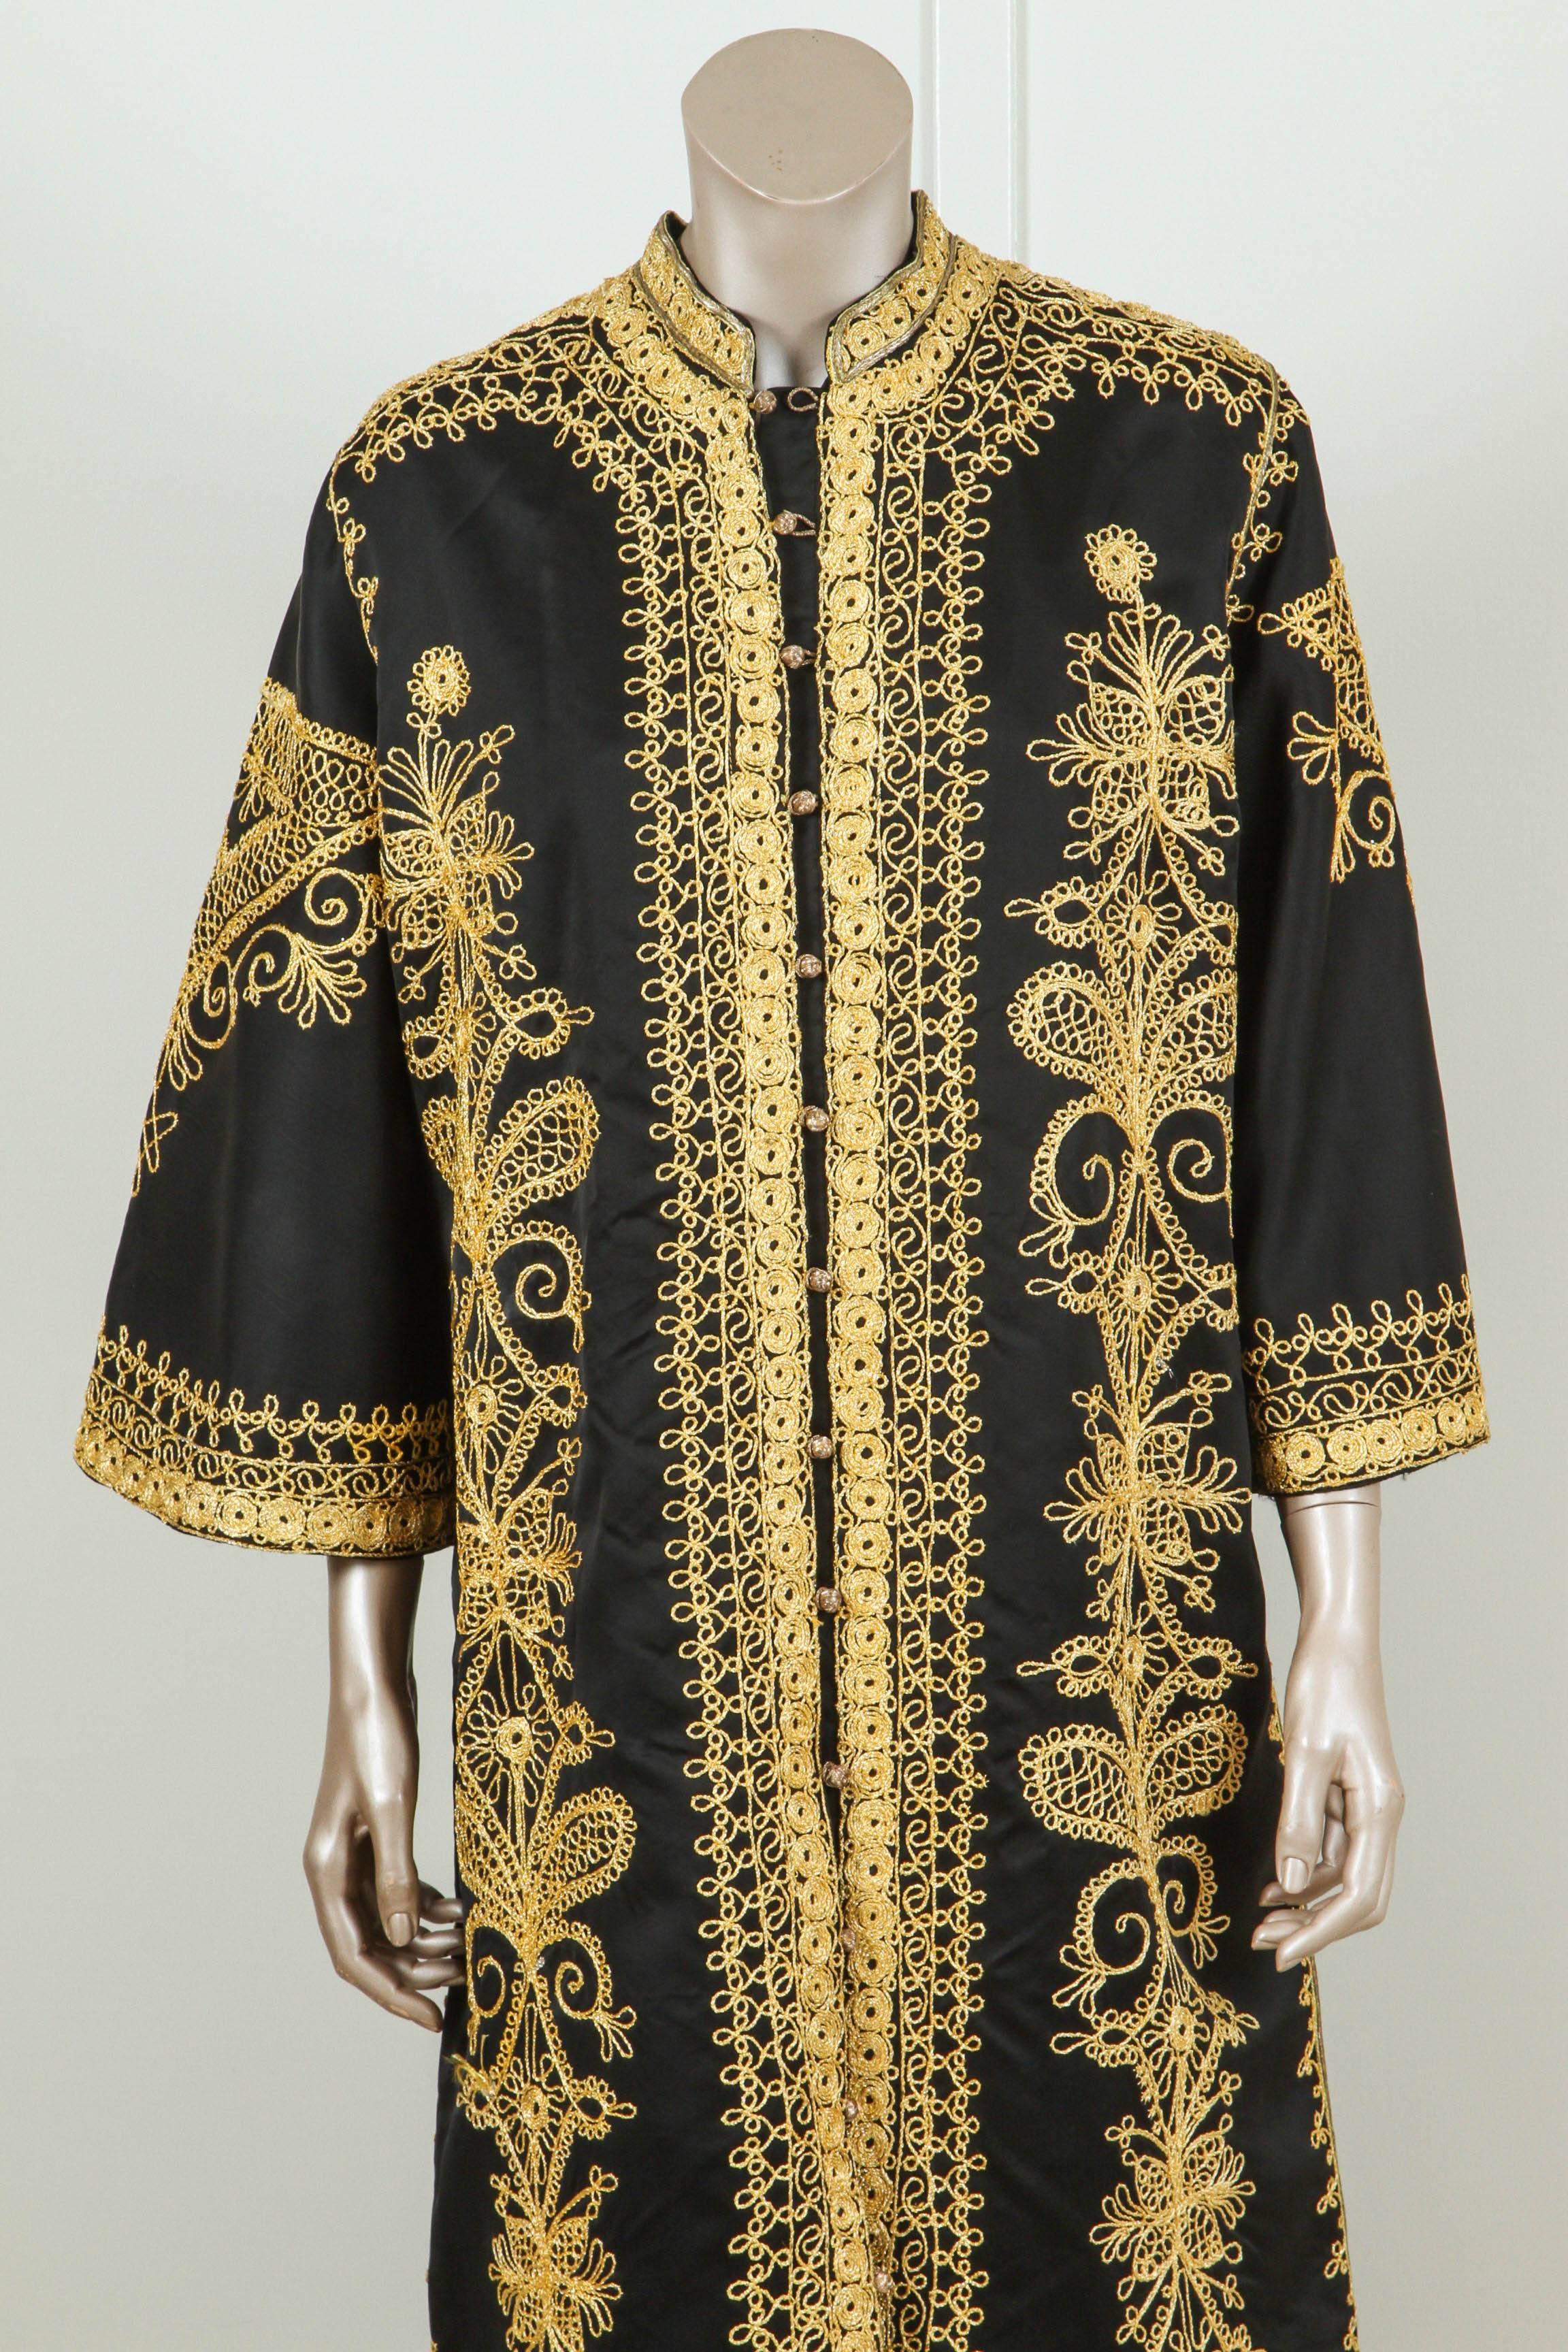 Embroidered Moroccan Vintage Black and Gold Caftan